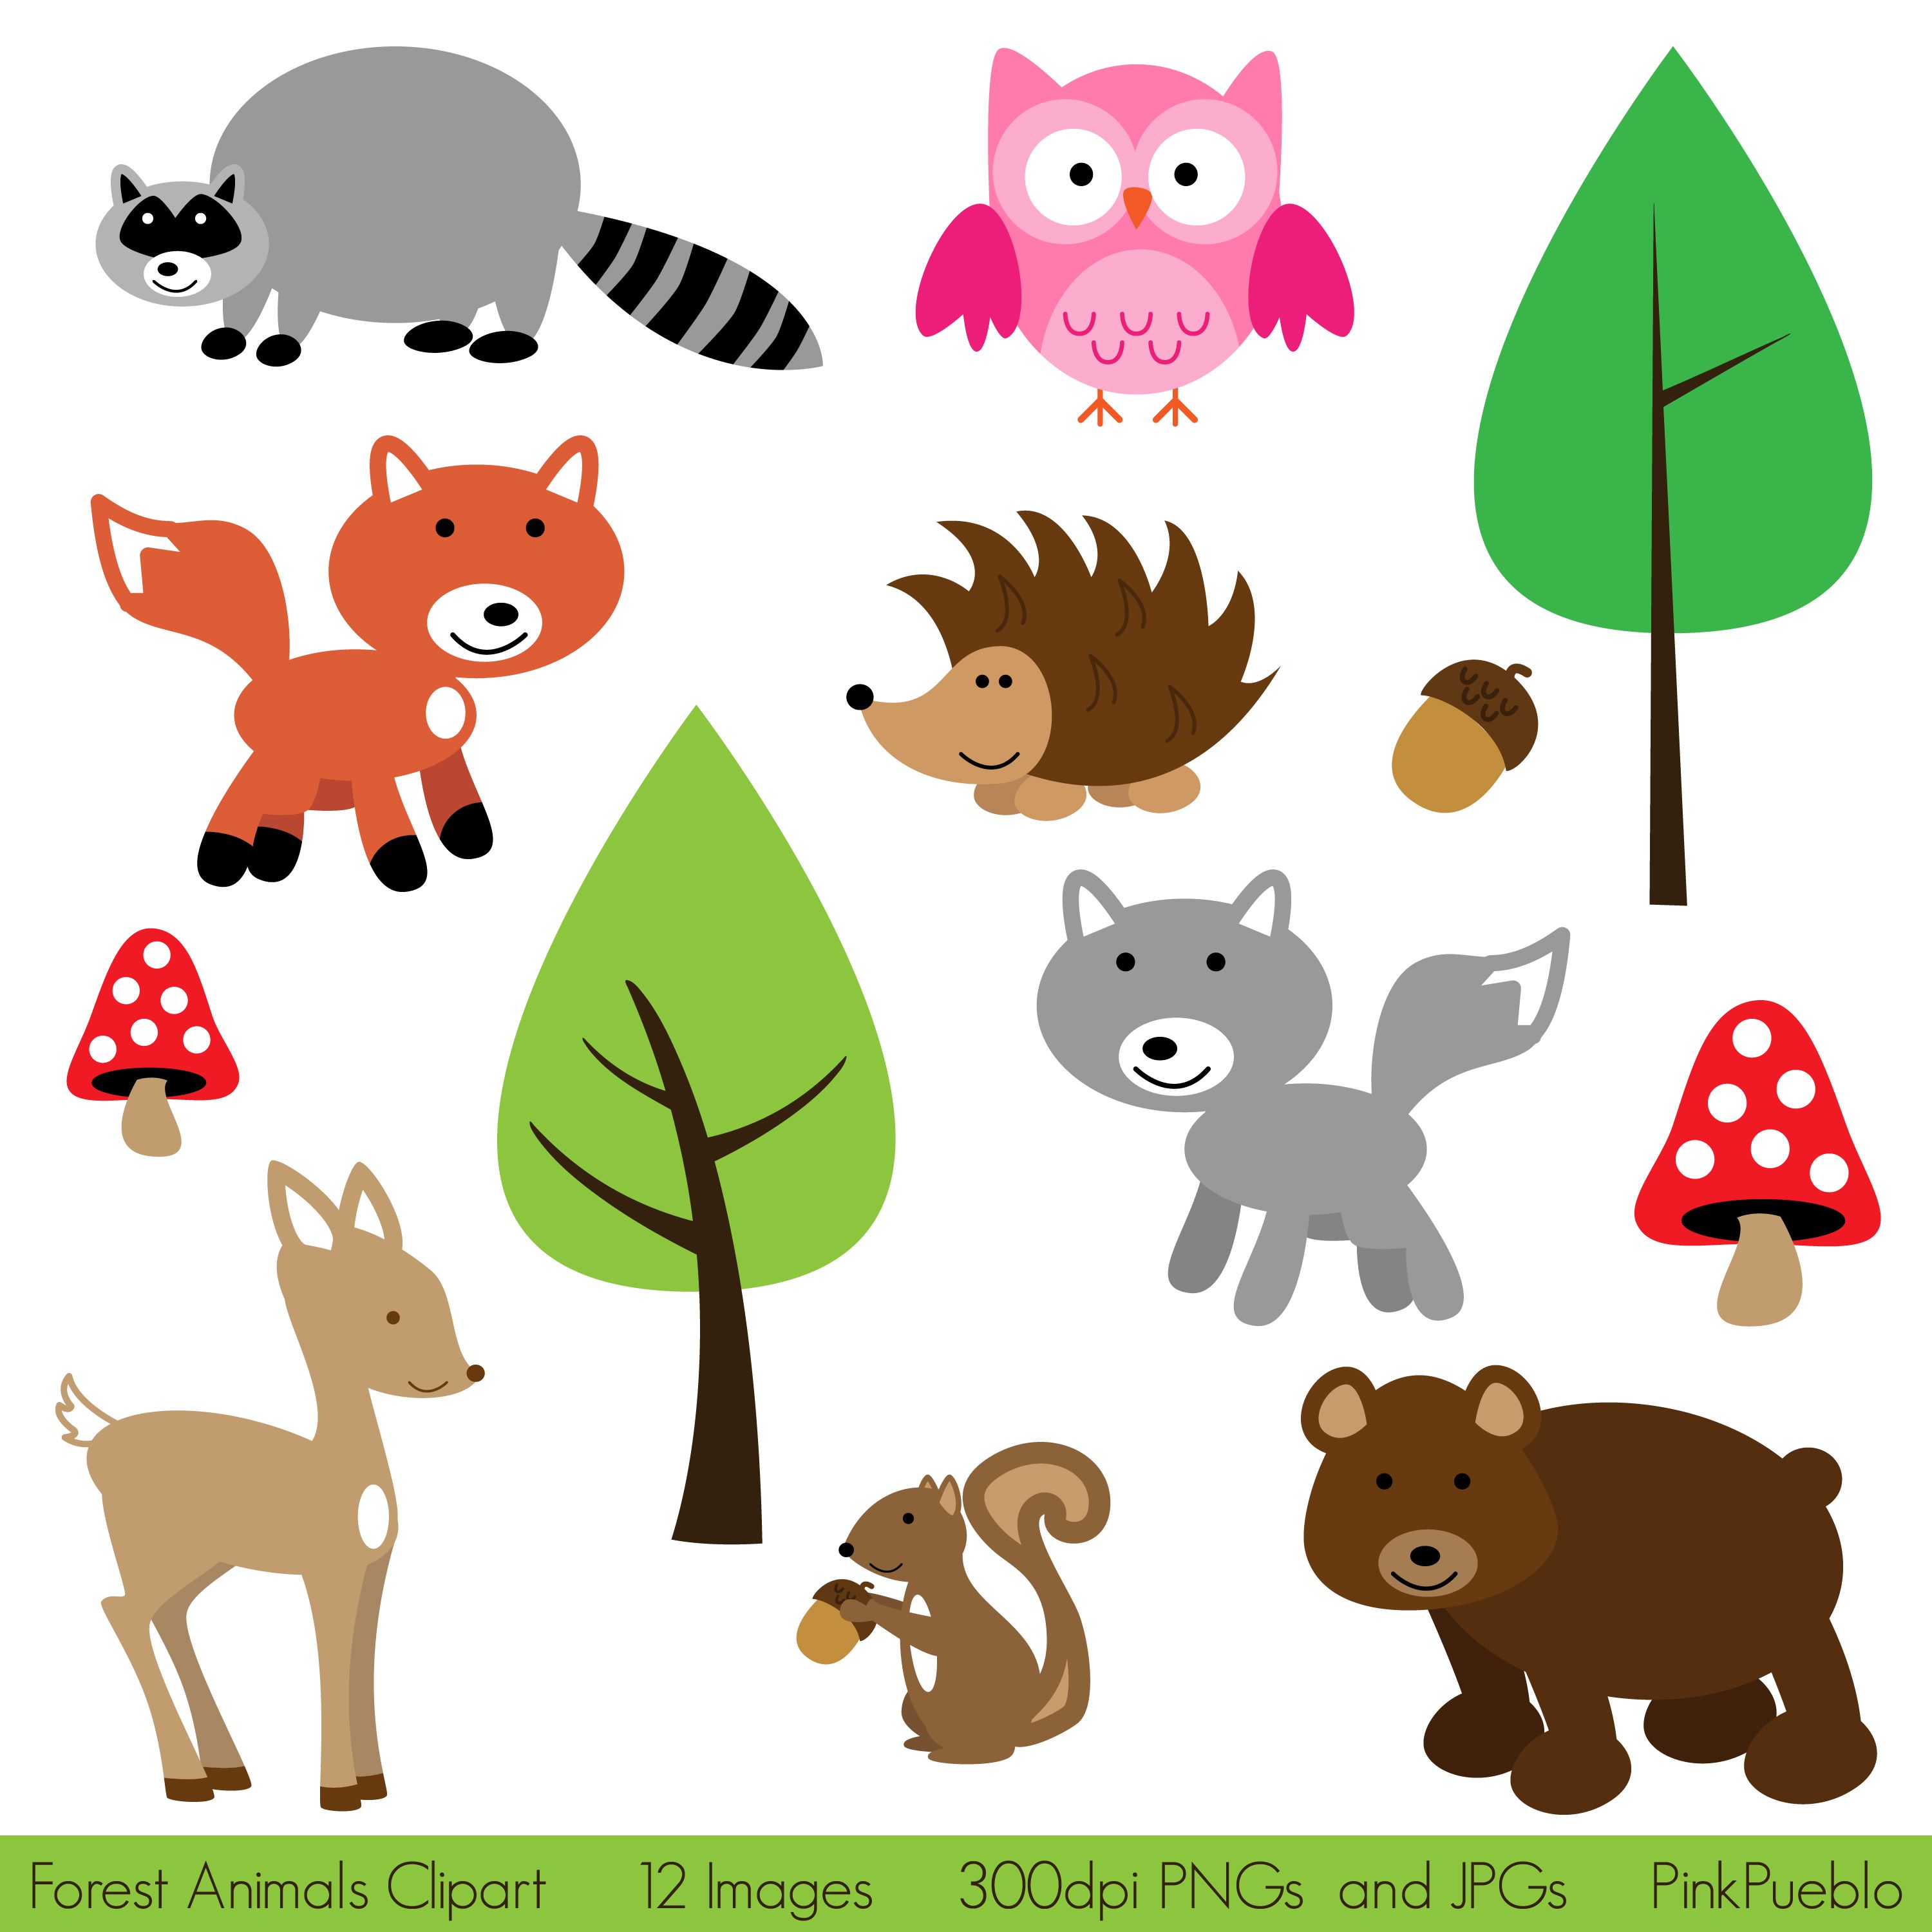 Forest Animal Clip Art, Forest Animals Clipart, Woodland